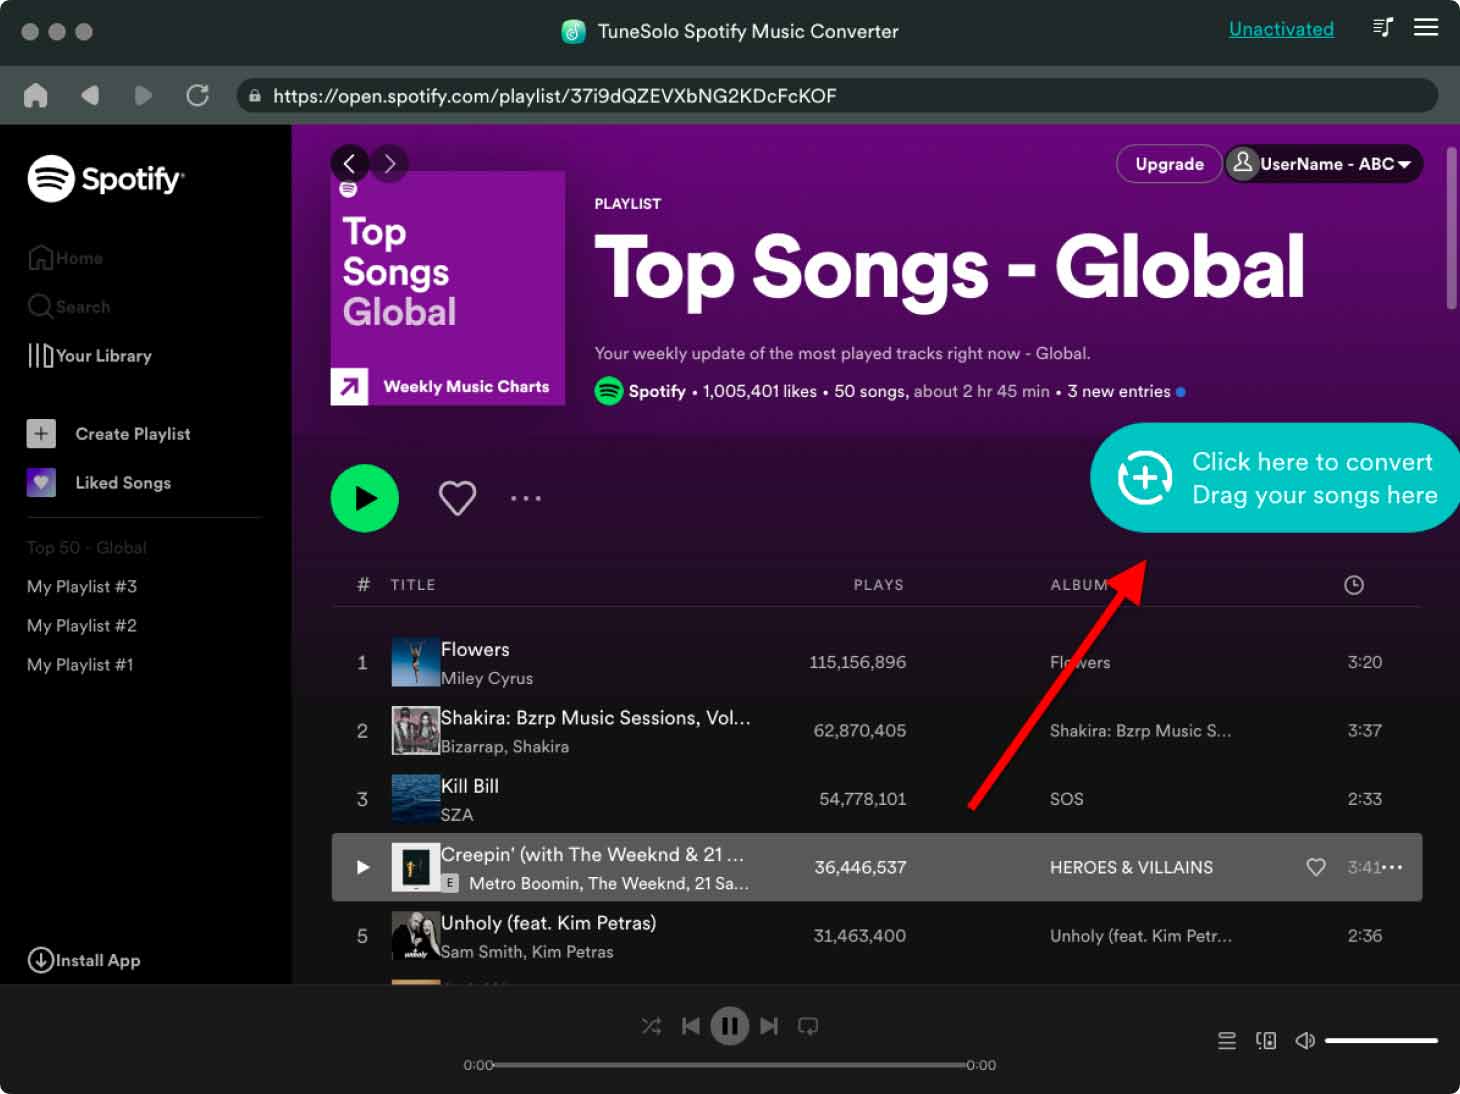 Add Tracks from Spotify to TuneSolo